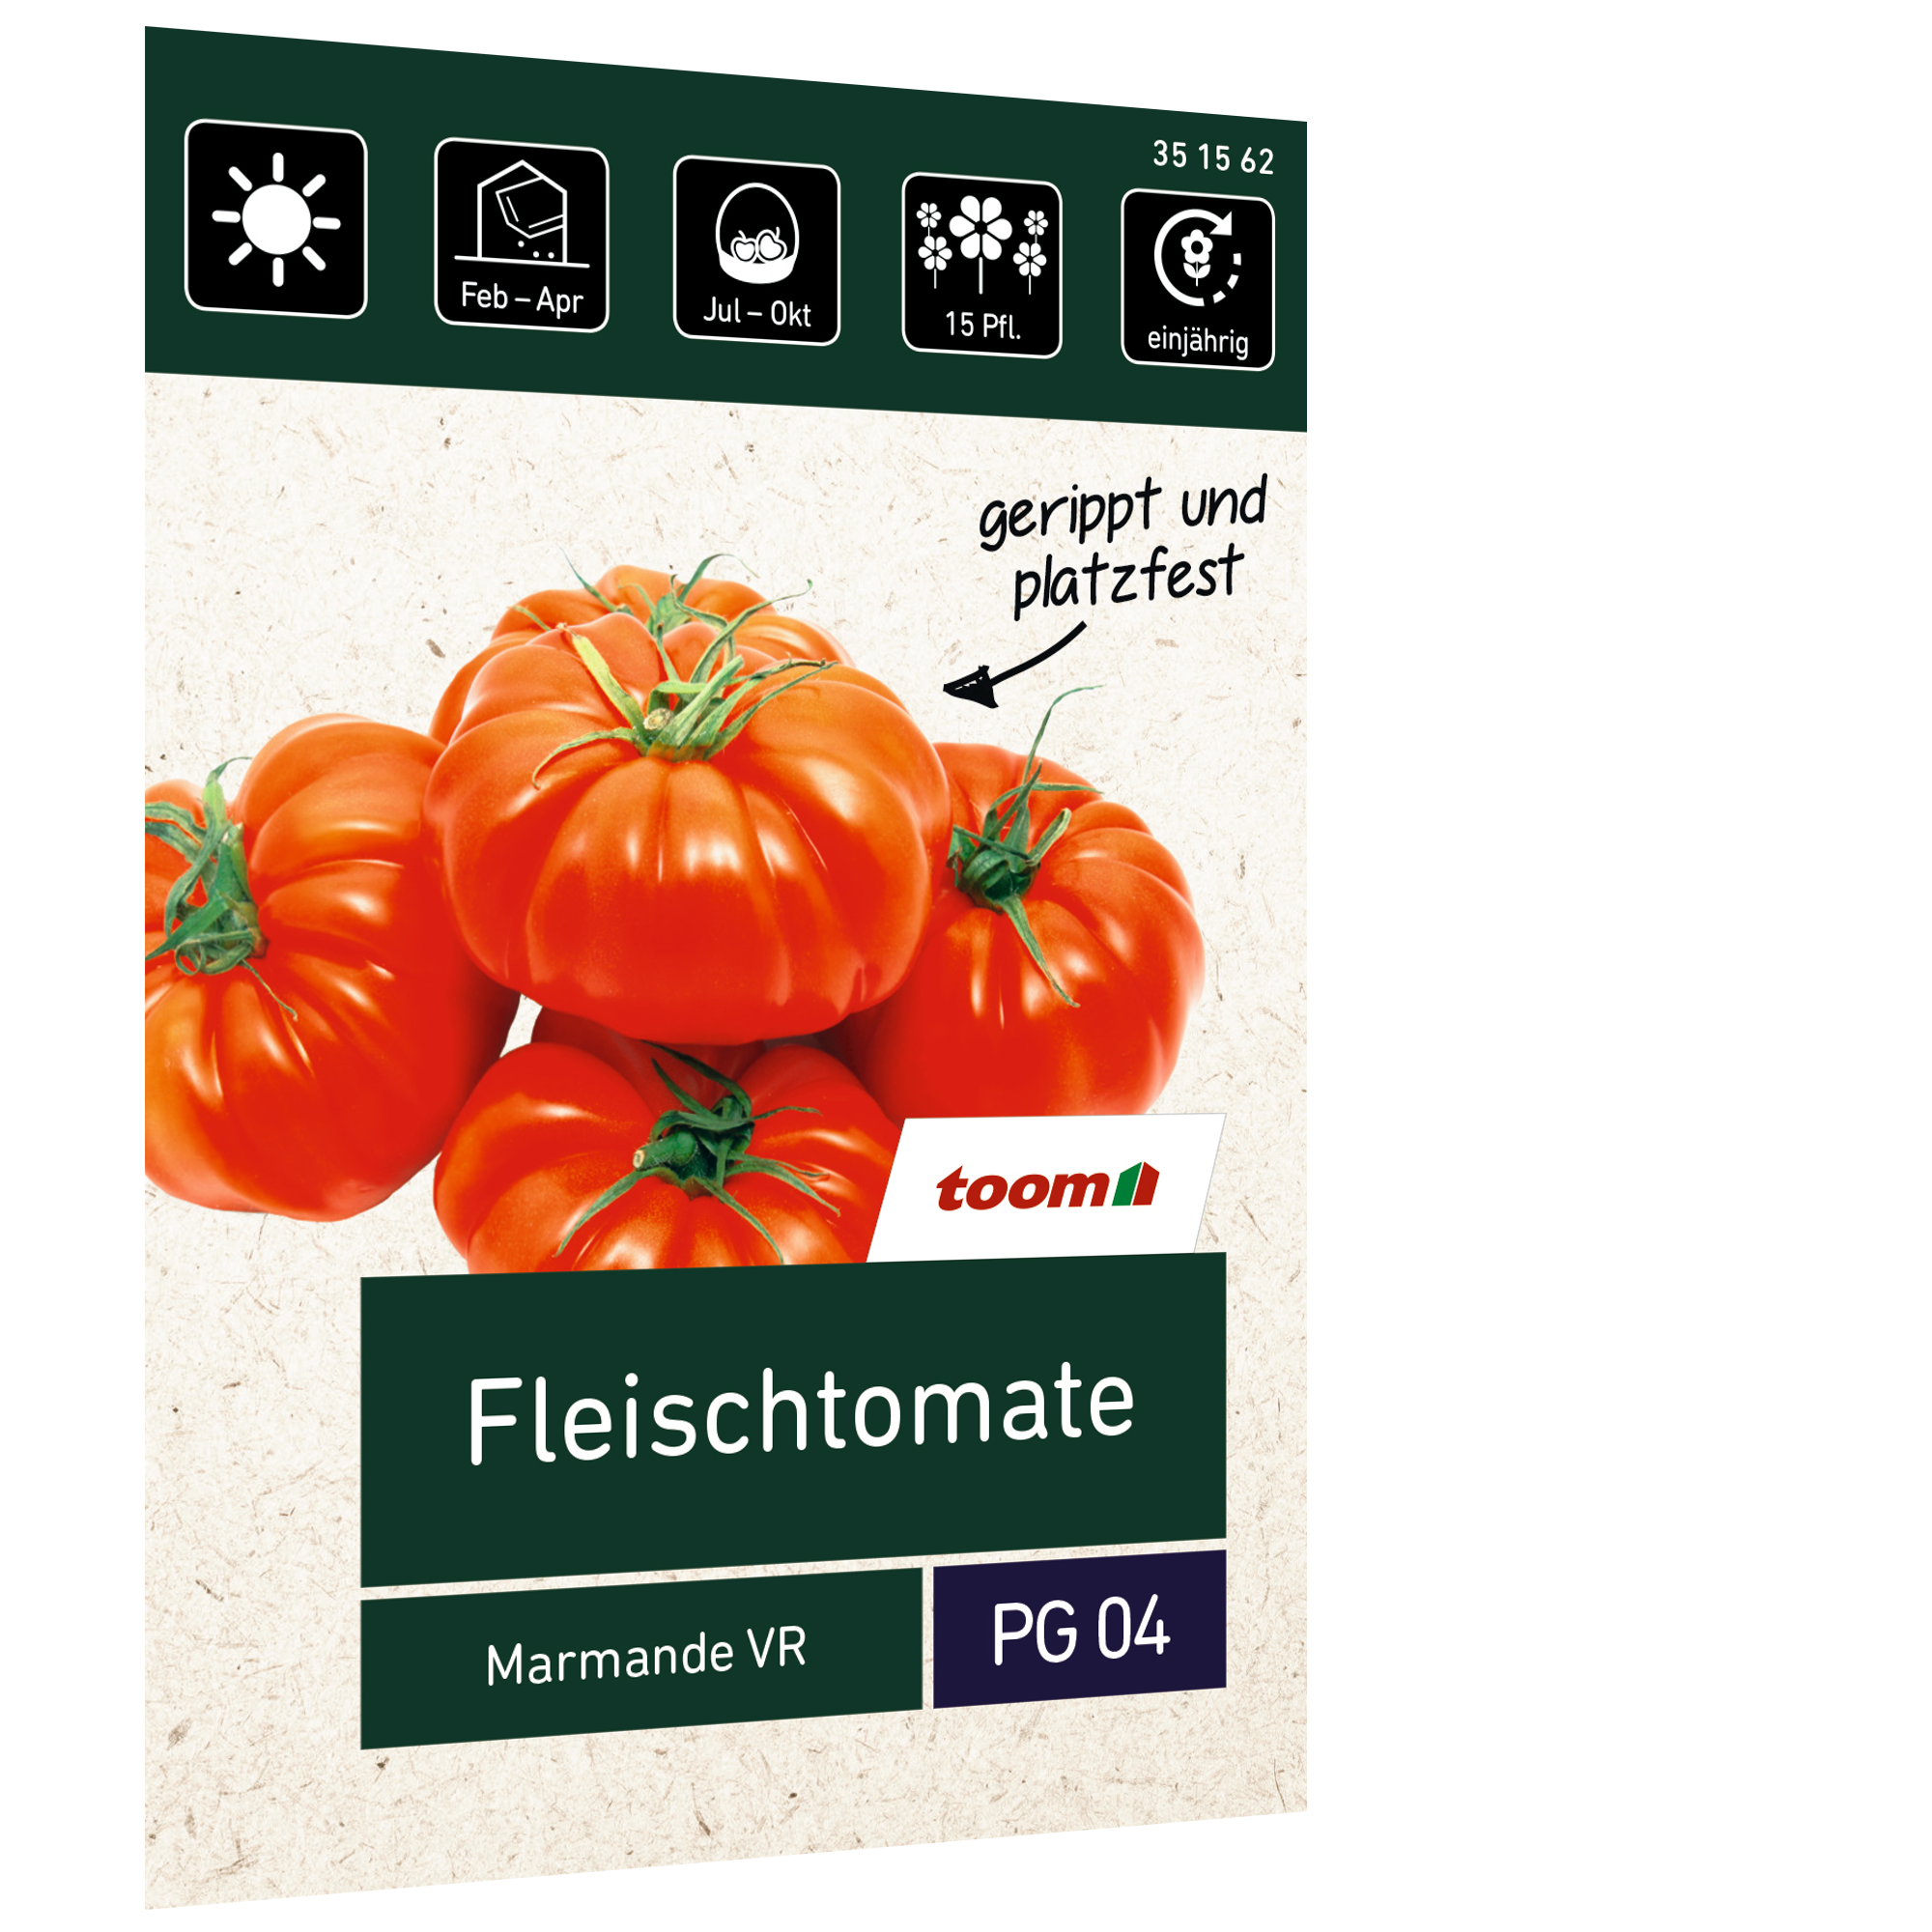 Fleischtomate 'Marmande VR' + product picture